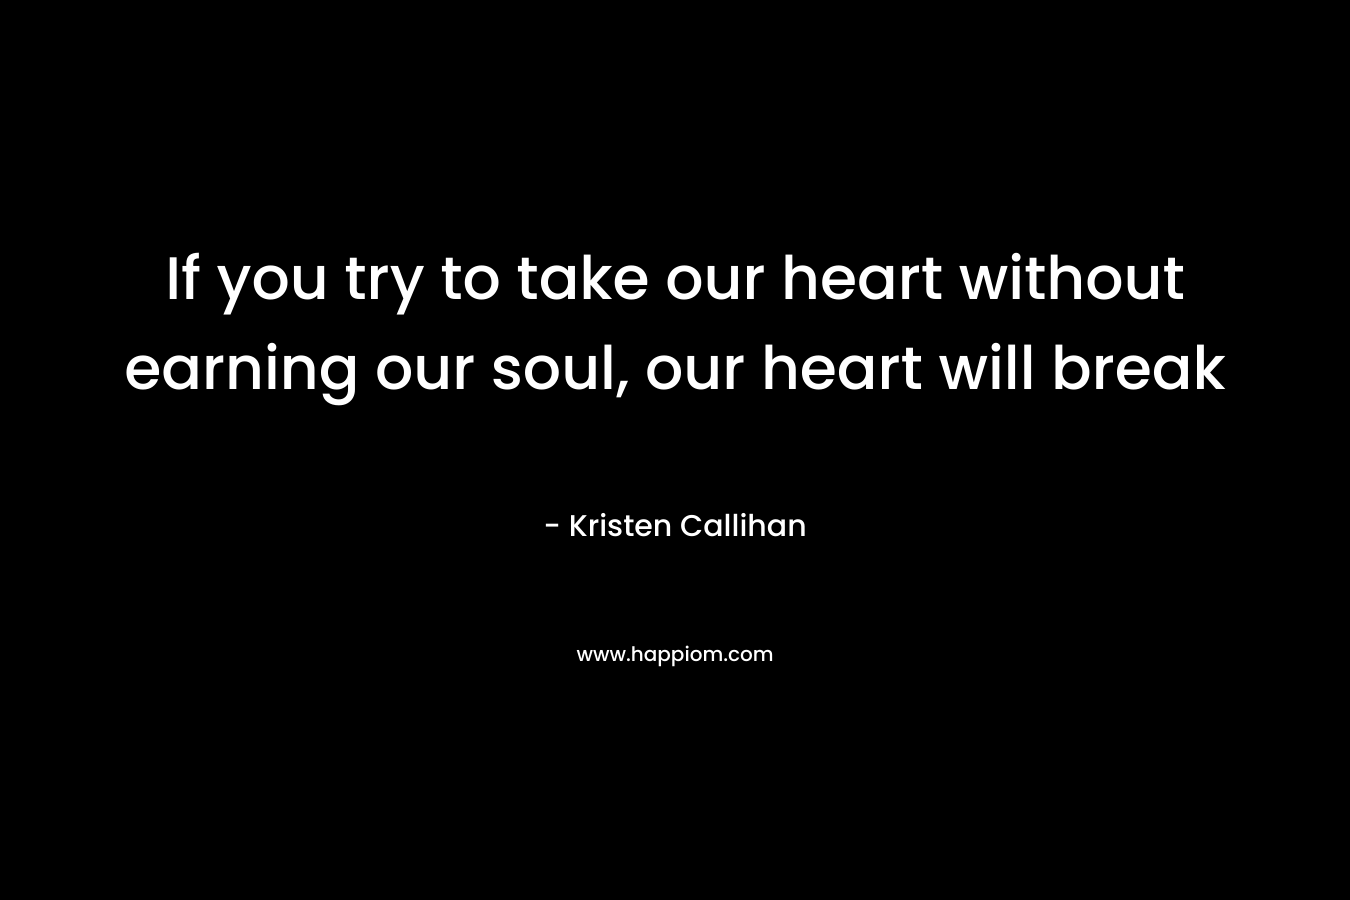 If you try to take our heart without earning our soul, our heart will break